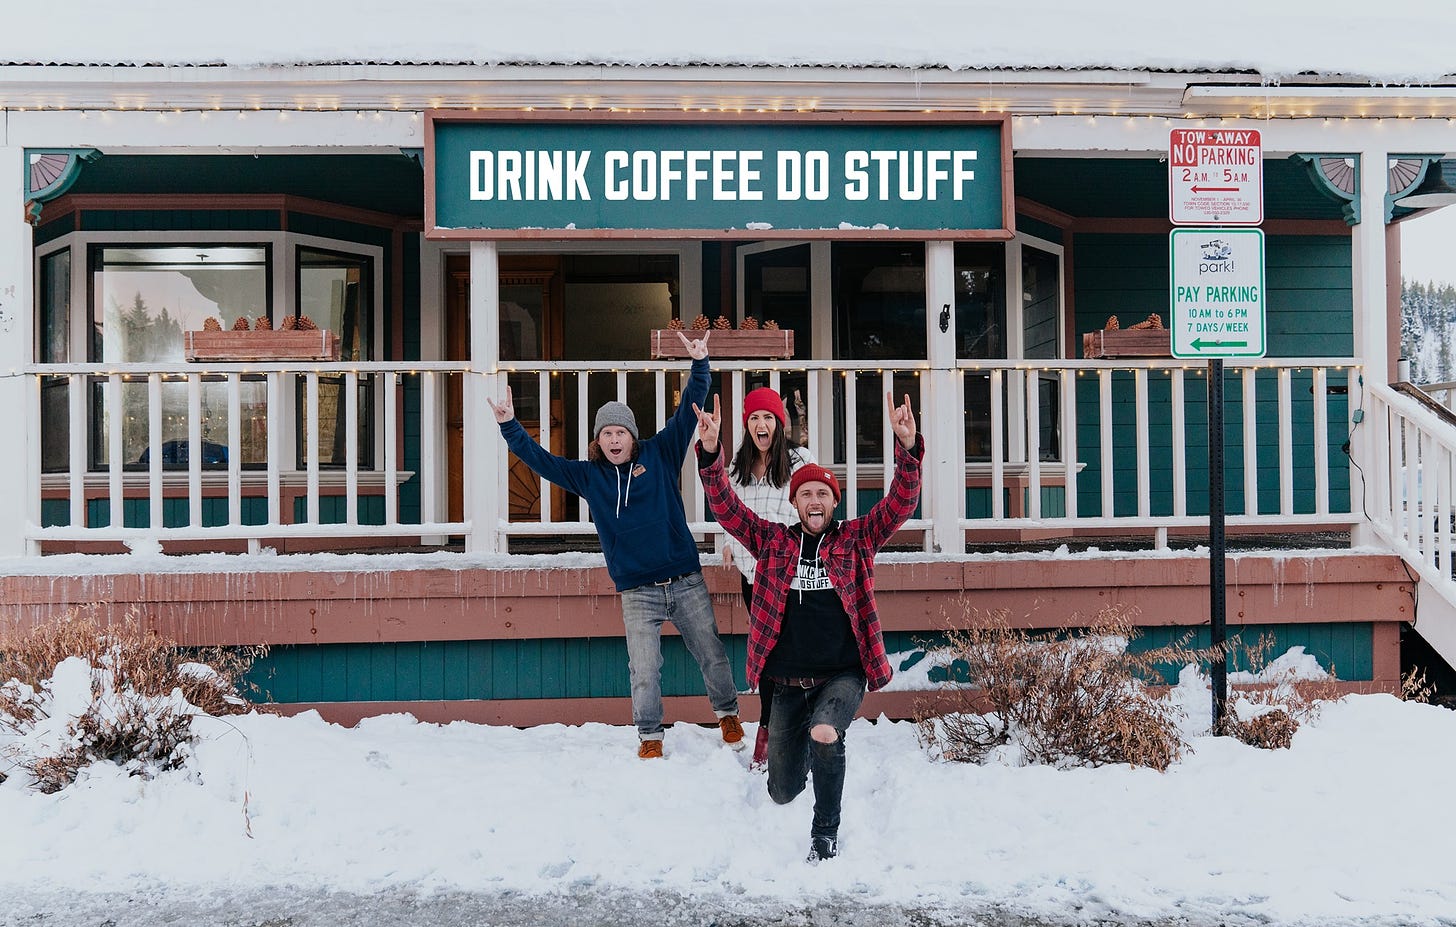 Standing in the snow in front of coffee shop, three stocking cap clad friends throw up the rock n roll devil horns in excitement.